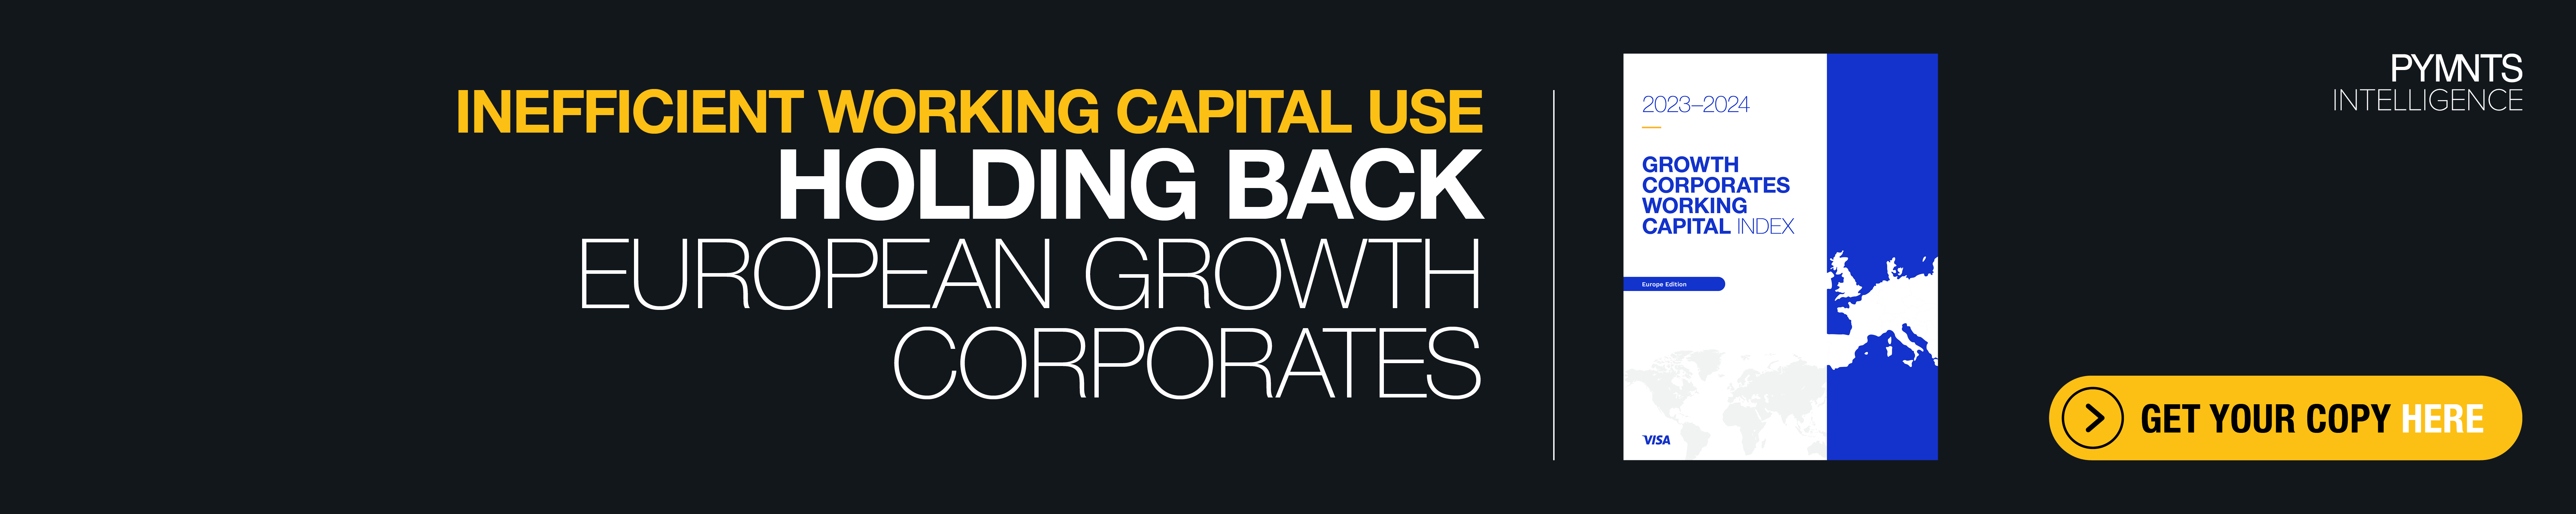 Visa Growth Corporates Working Capital Index Europe Edition February 2024 Banner